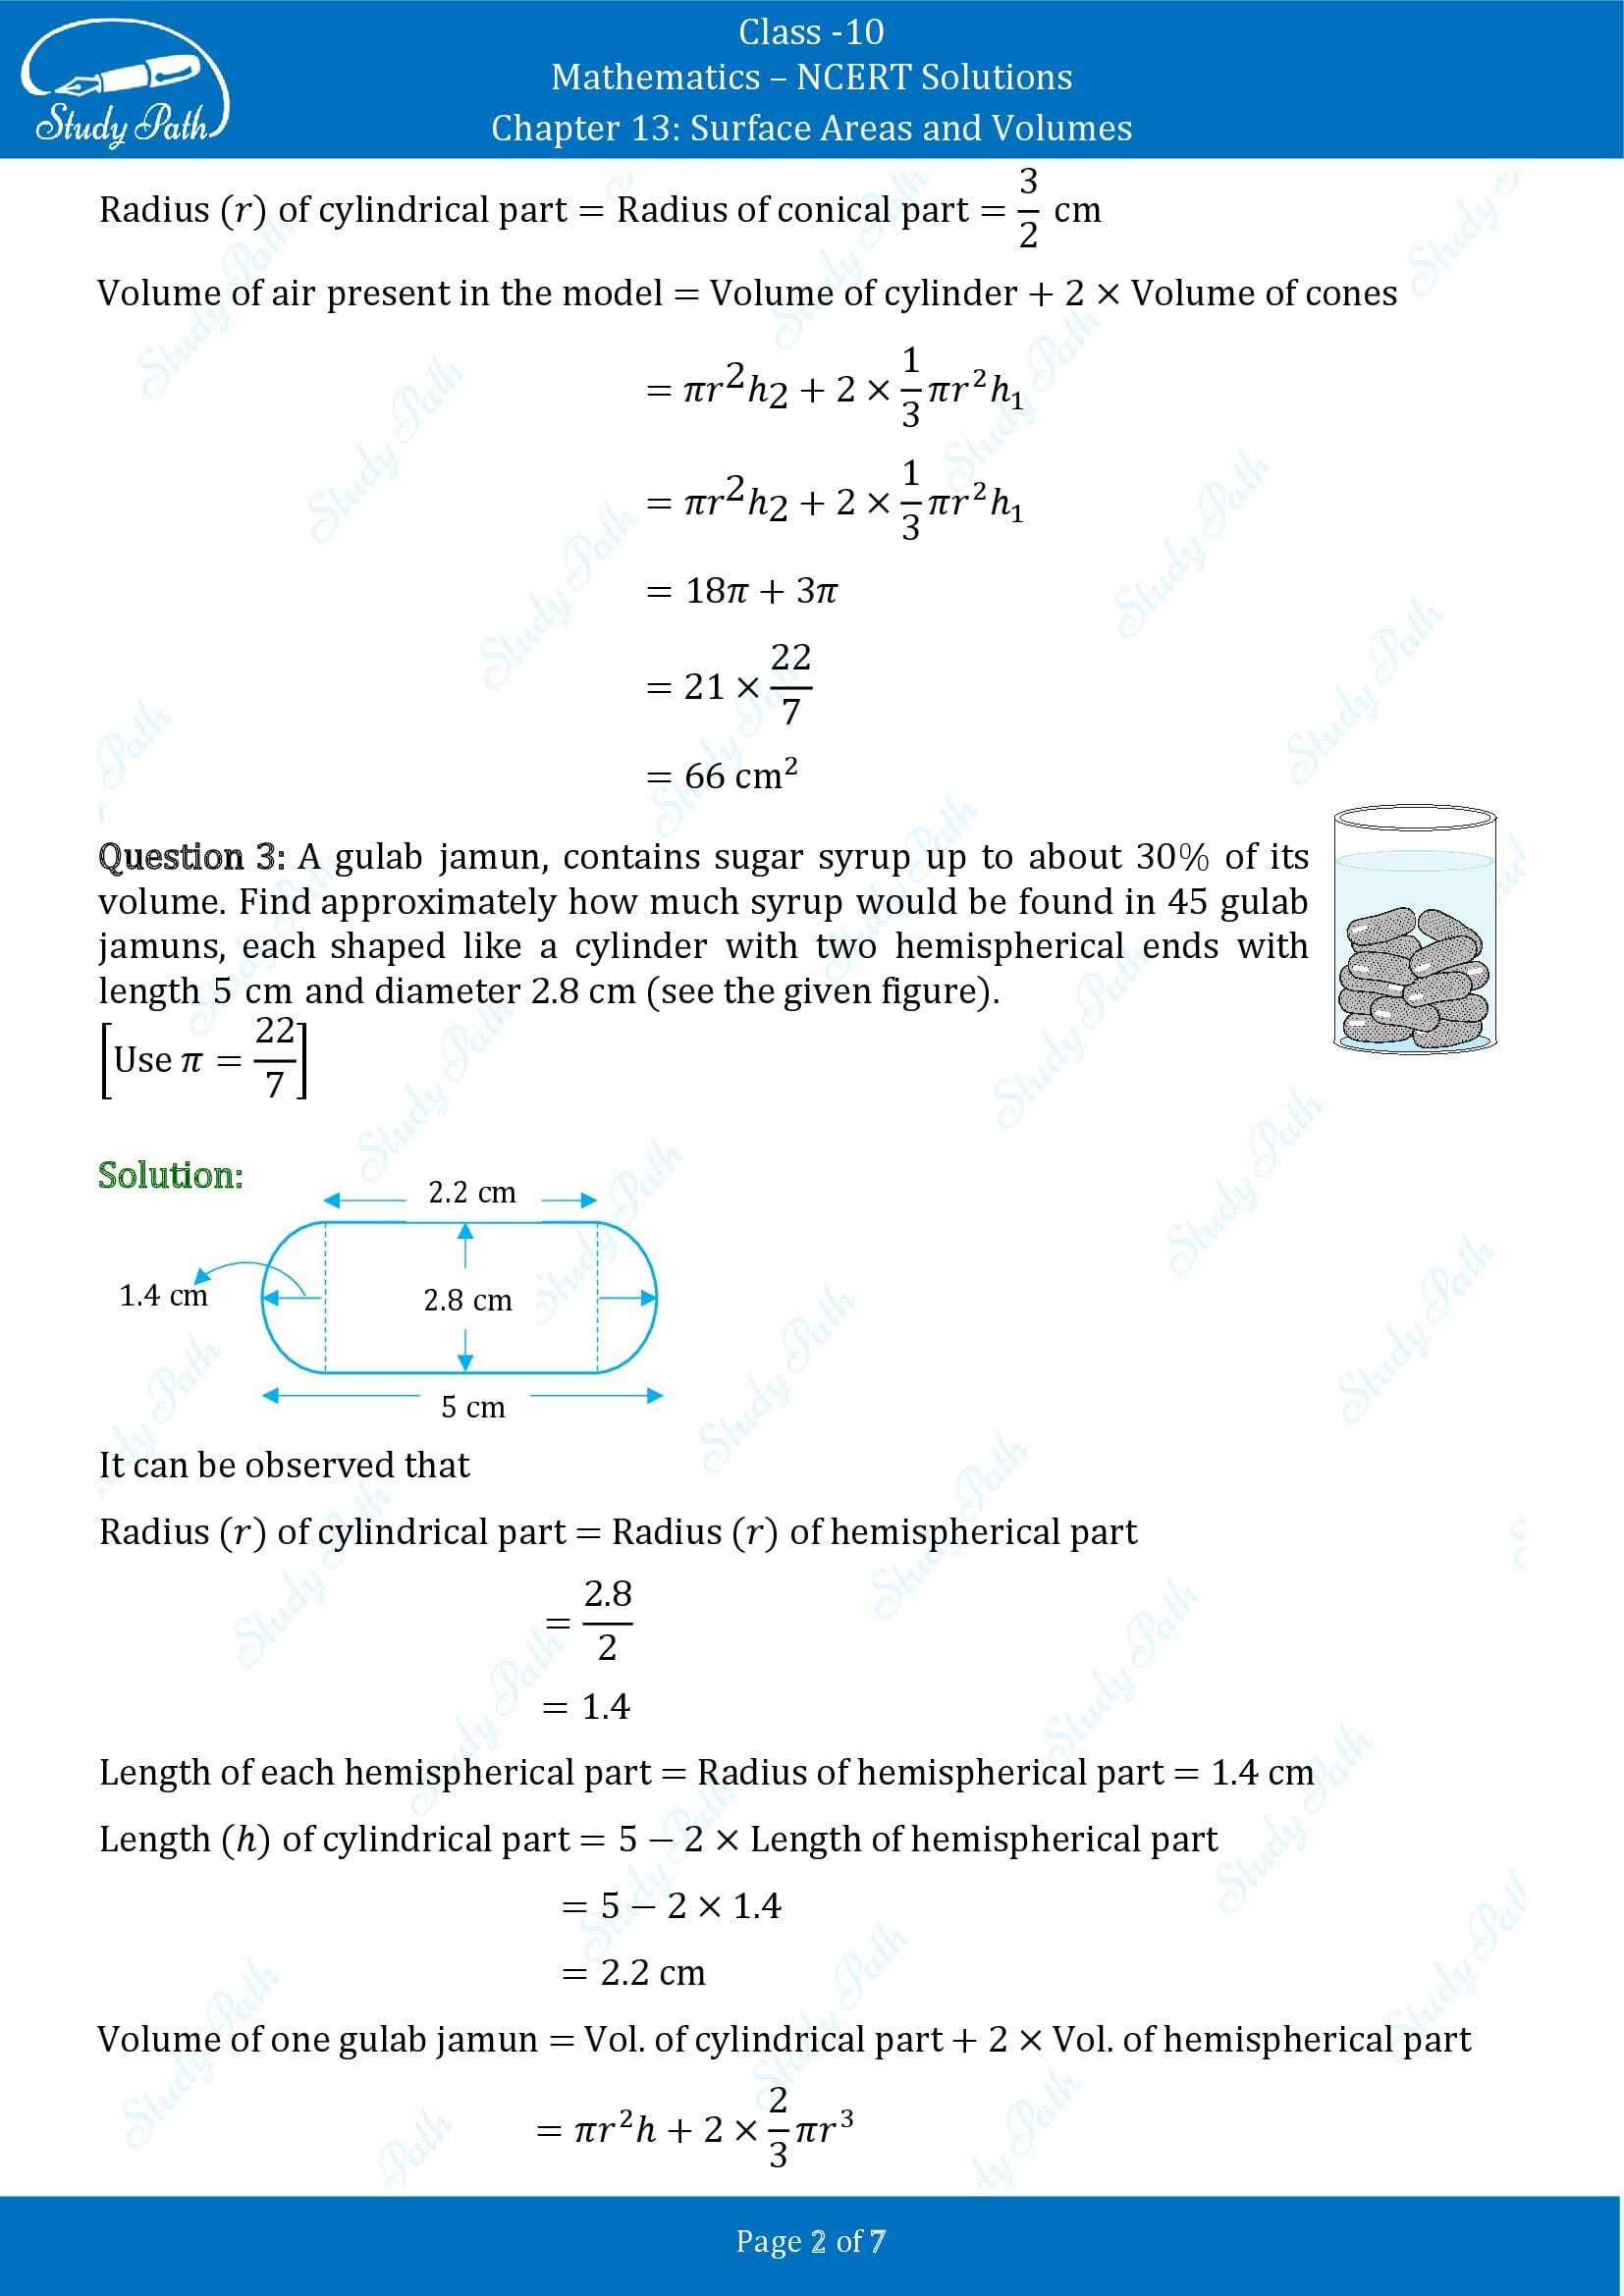 NCERT Solutions for Class 10 Maths Chapter 13 Surface Areas and Volumes Exercise 13.2 00002